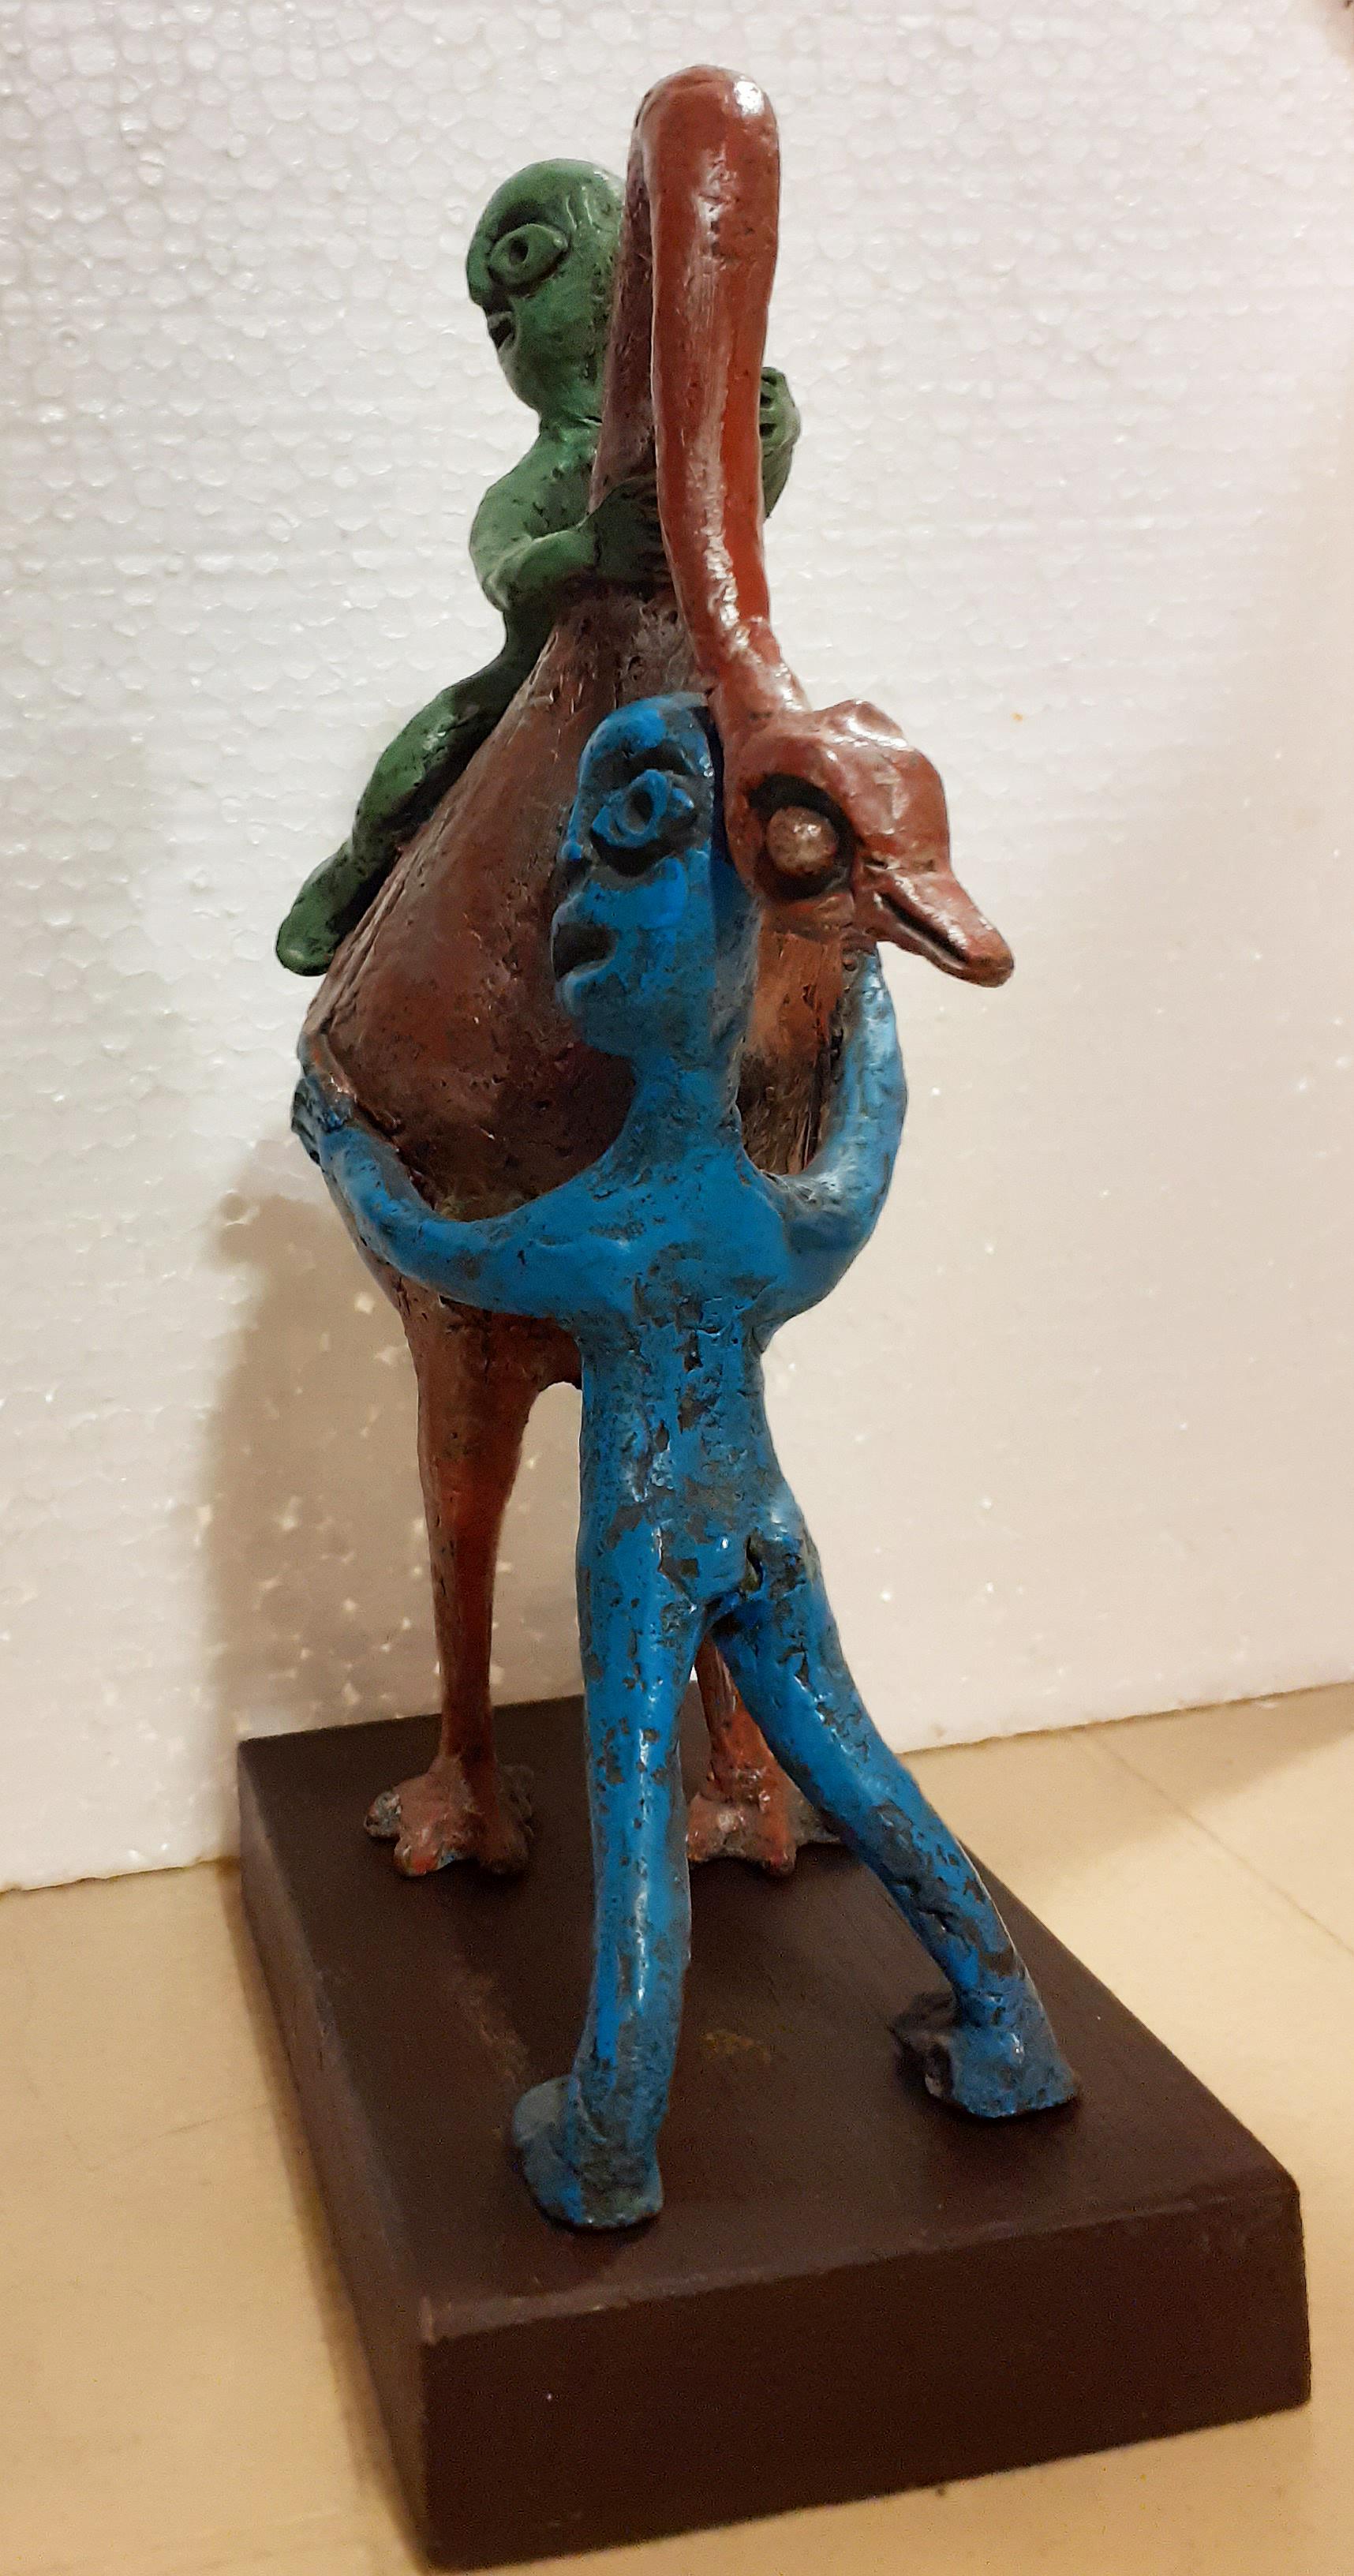 Subrata Biswas - Innocent Life
Bronze, H 9.5 x W 7 x D 2.75 inches

Style : The motive of a child in its most basic form appears quite repeatedly in the works of Subrata Biswas. The elementary human form representing the child complements innocence,